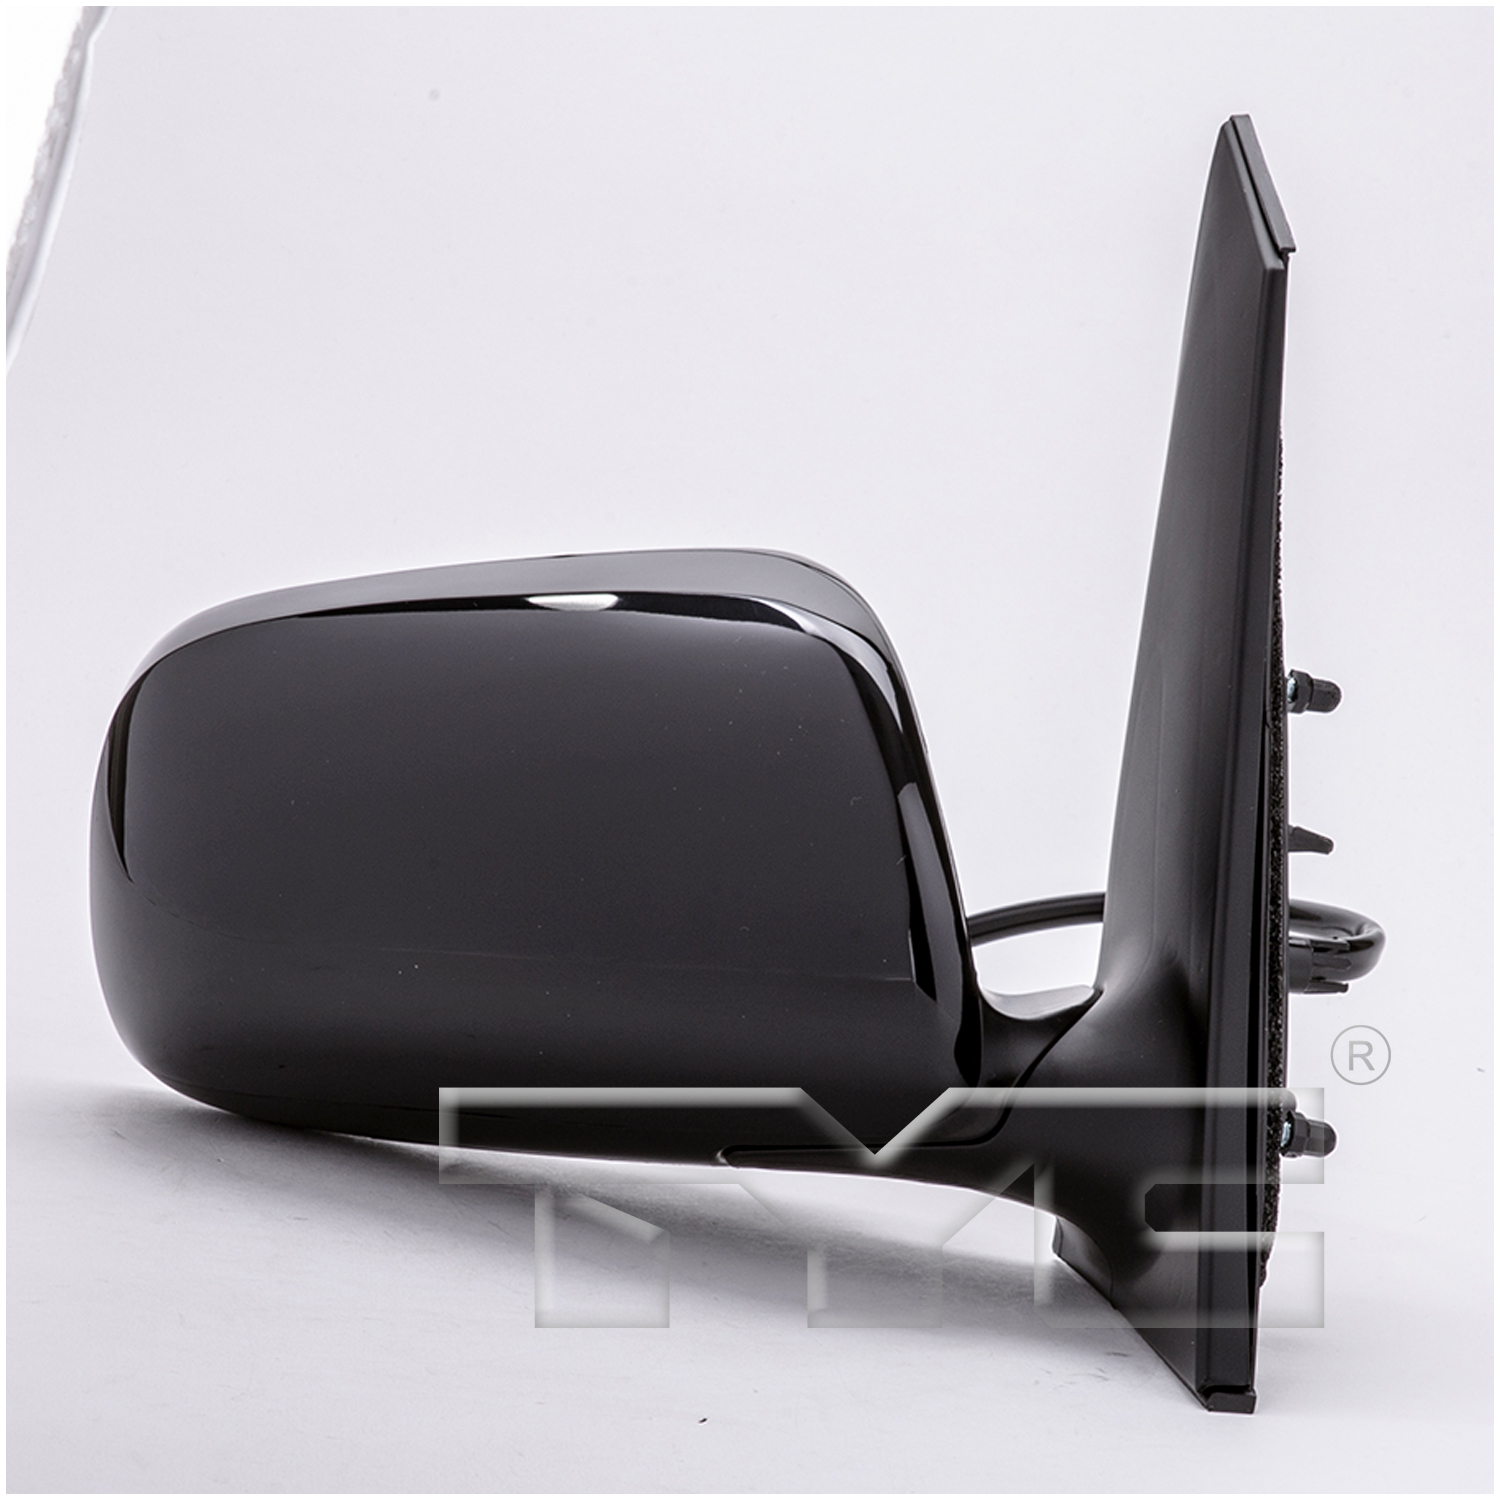 Aftermarket MIRRORS for TOYOTA - PRIUS, PRIUS,04-09,RT Mirror outside rear view